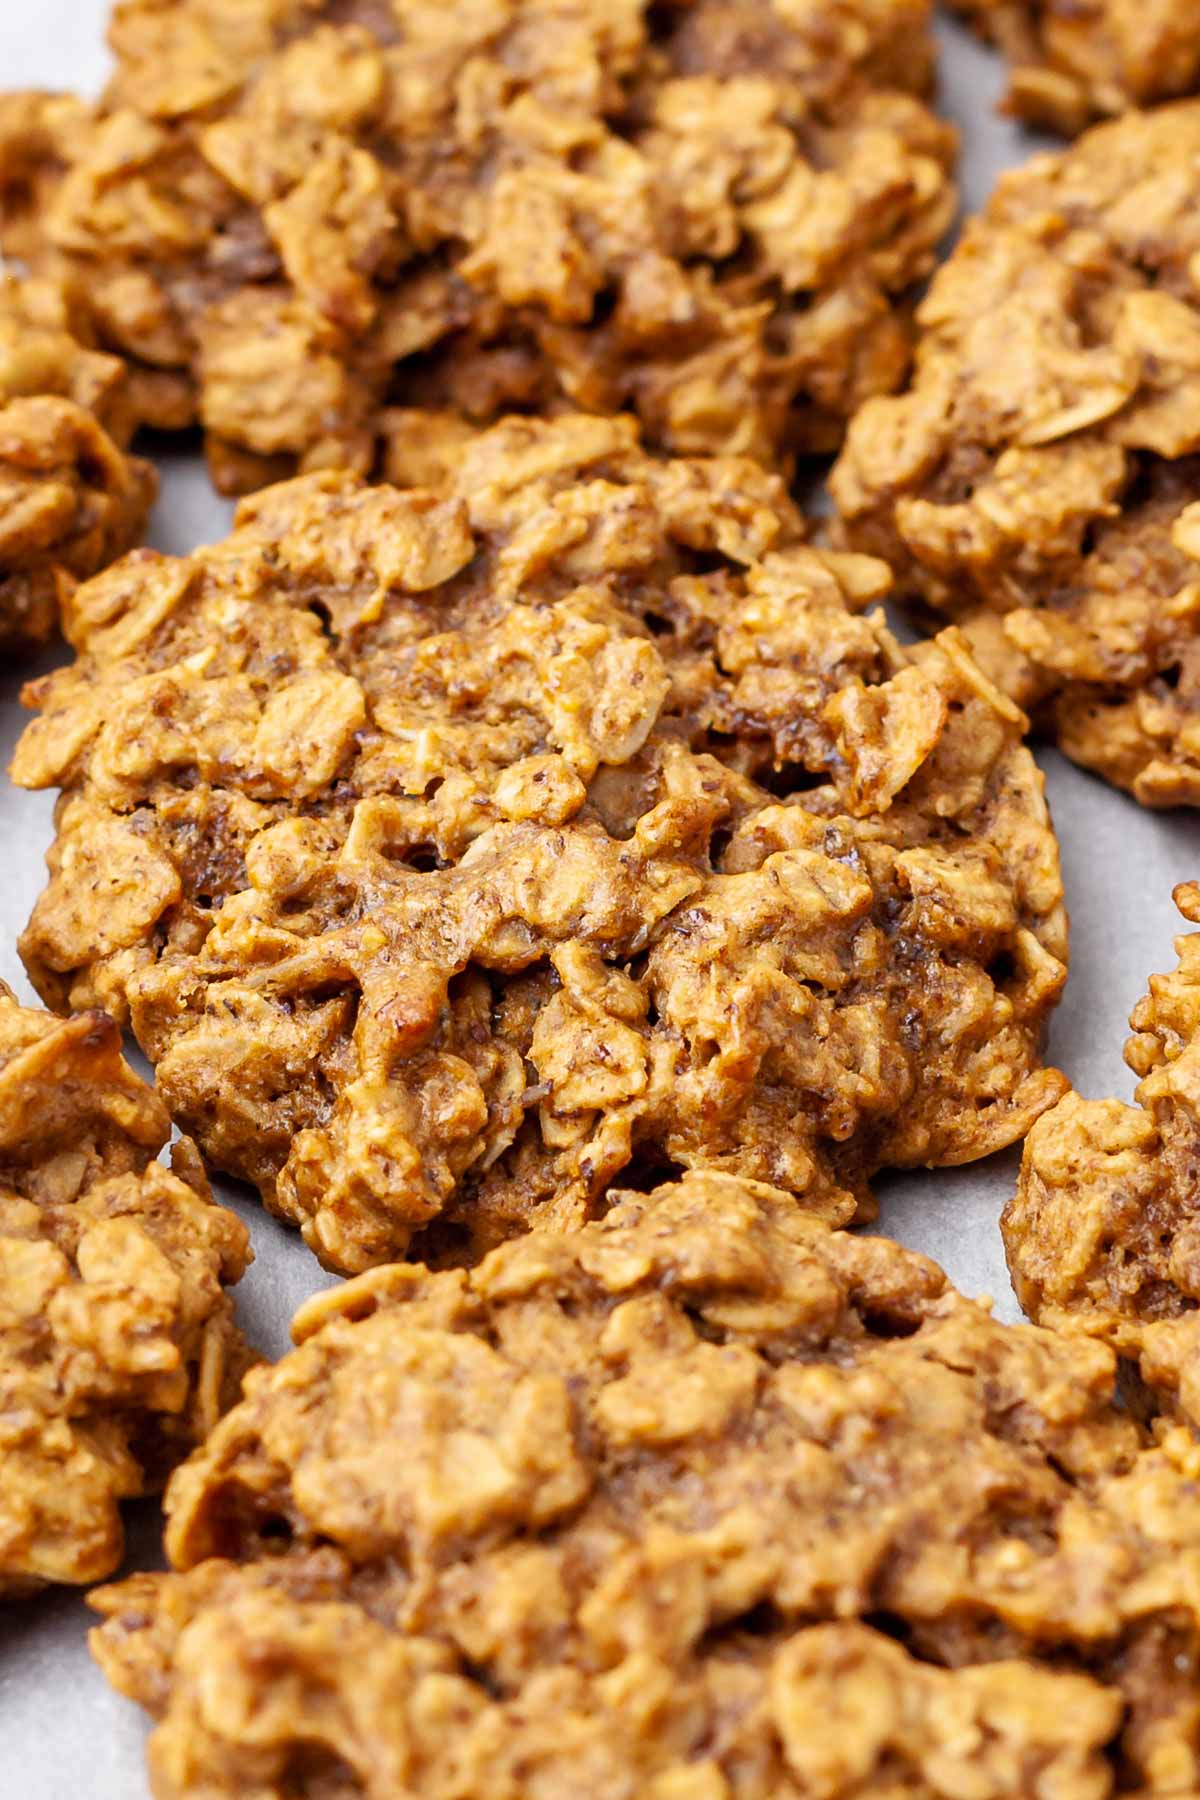 Close up view of freshly baked vegan peanut butter oatmeal cookies on a baking sheet.